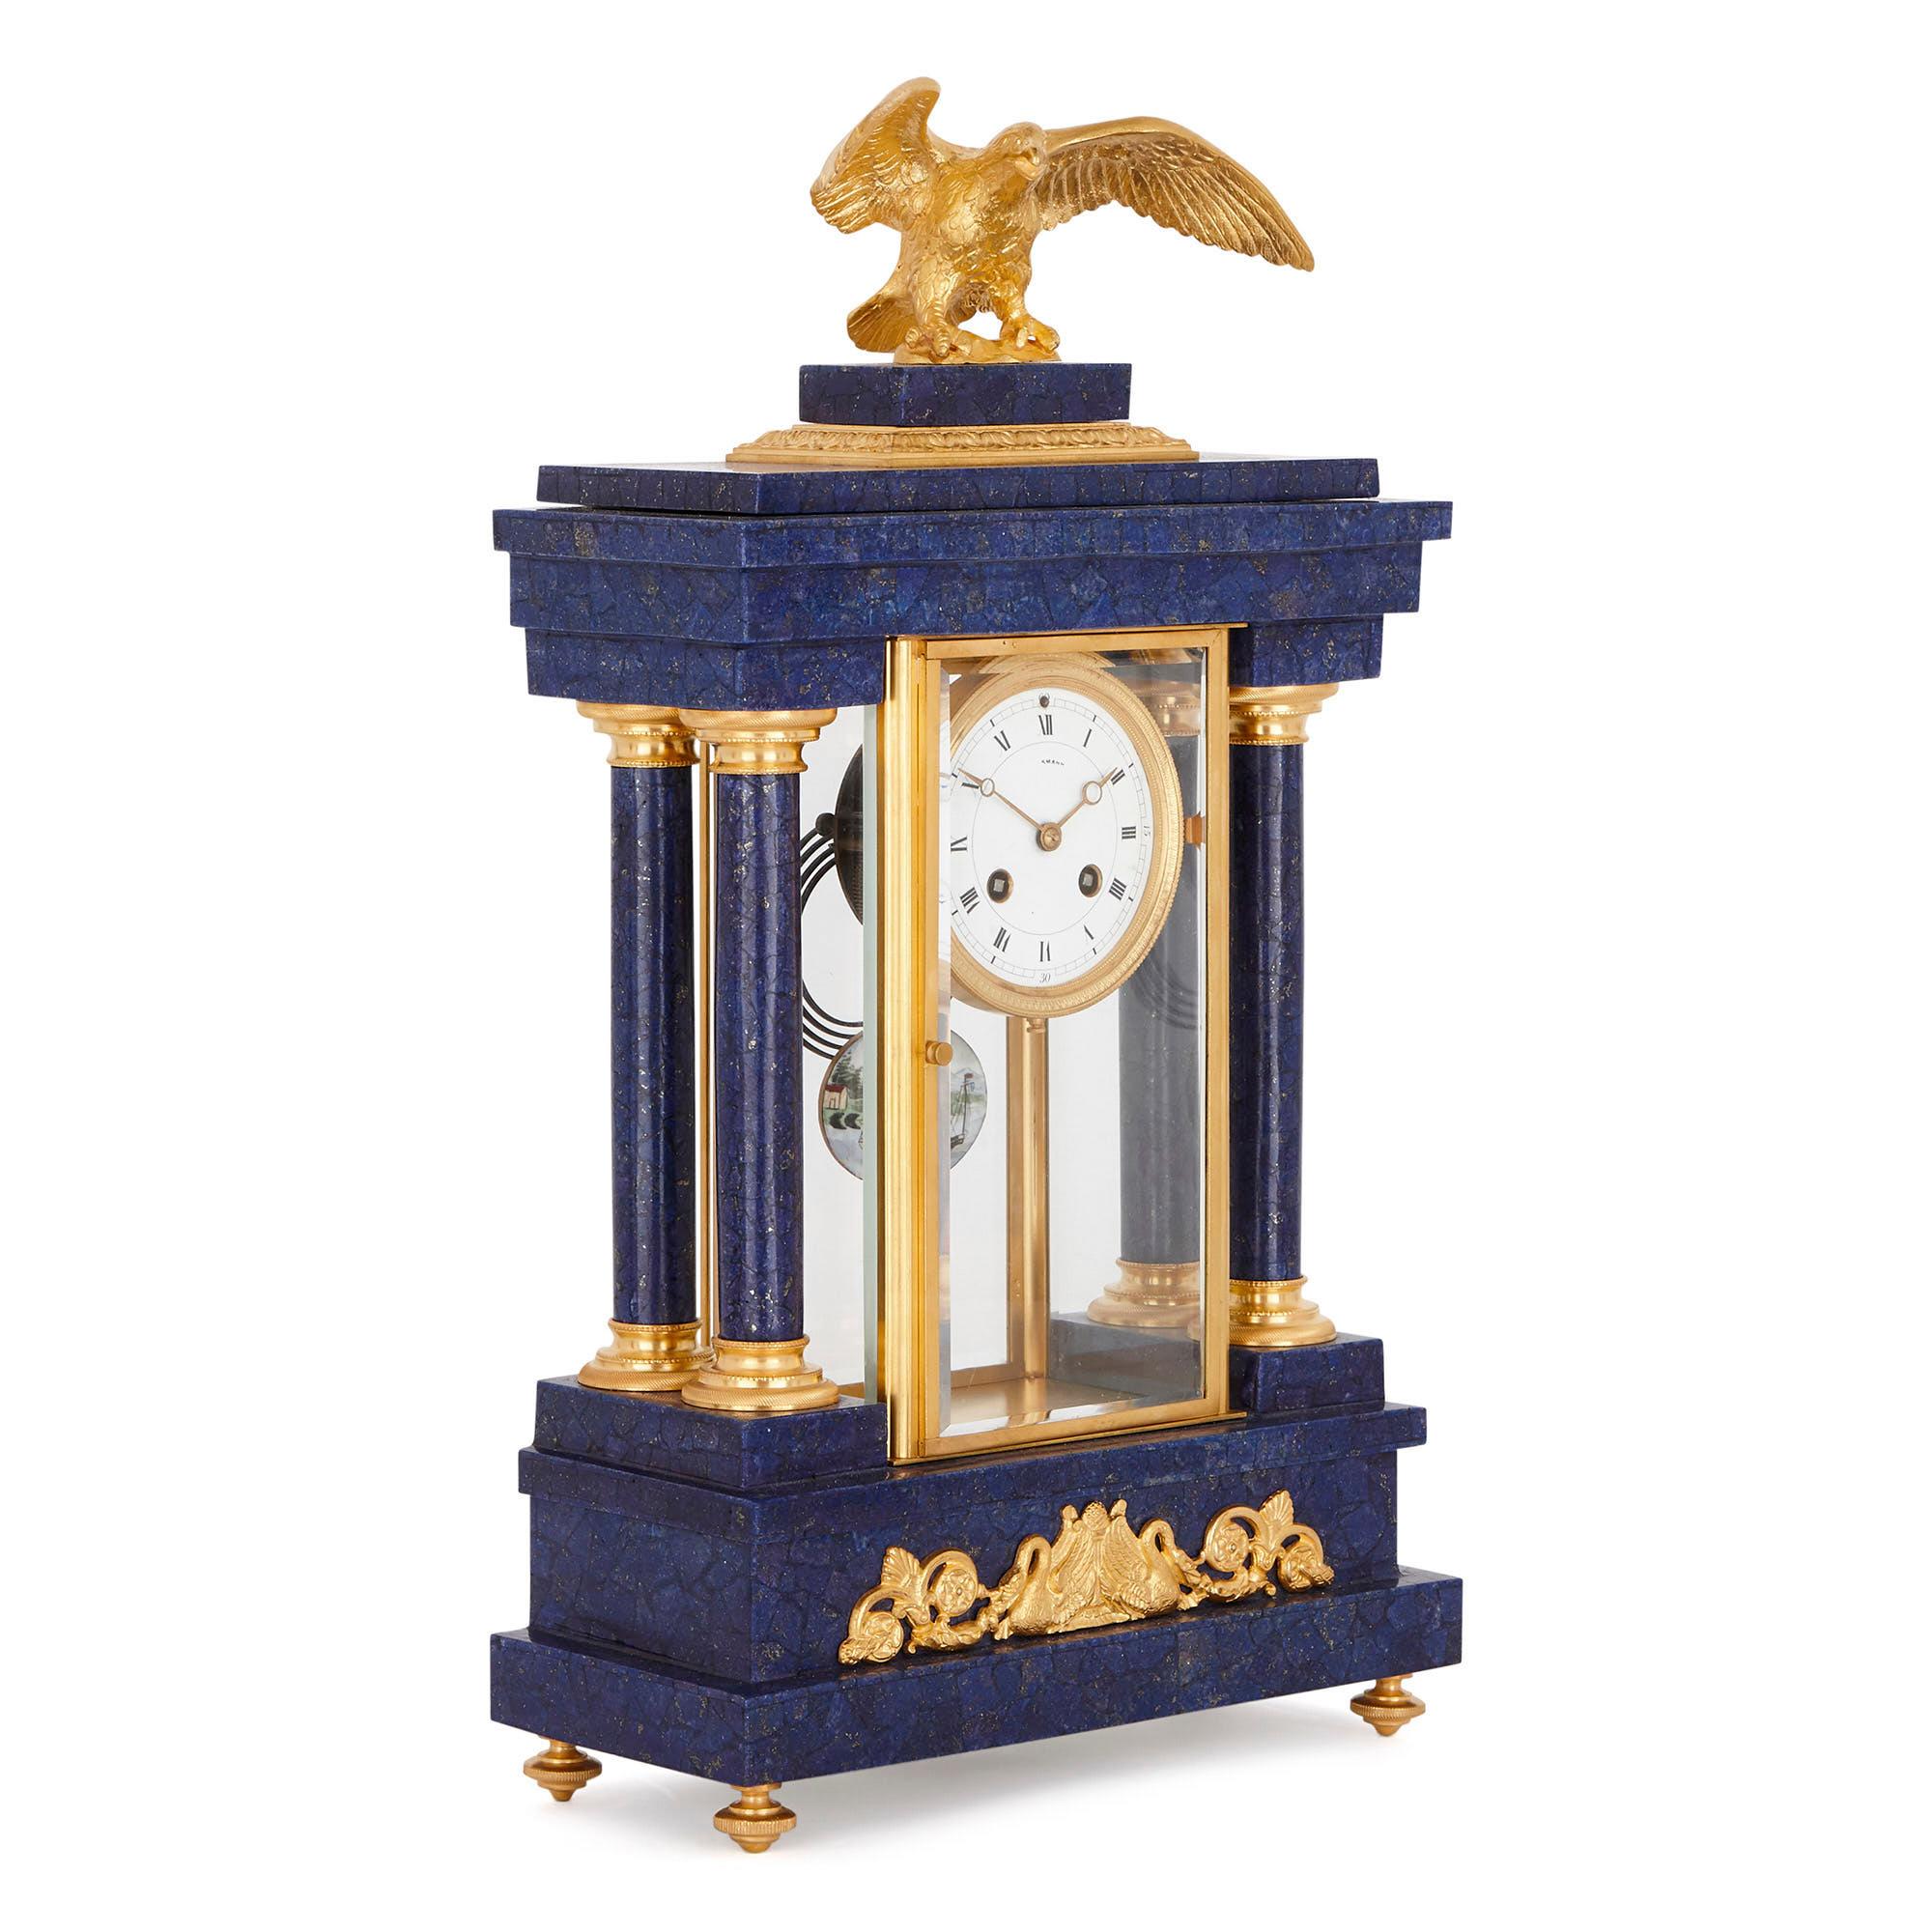 This beautiful early 20th Century clock set with later lapis veneer will make a stunning Neoclassical style addition to a mantelpiece and a bold interior statement thanks to its brilliant blue and gold colour scheme. The set dates from the early